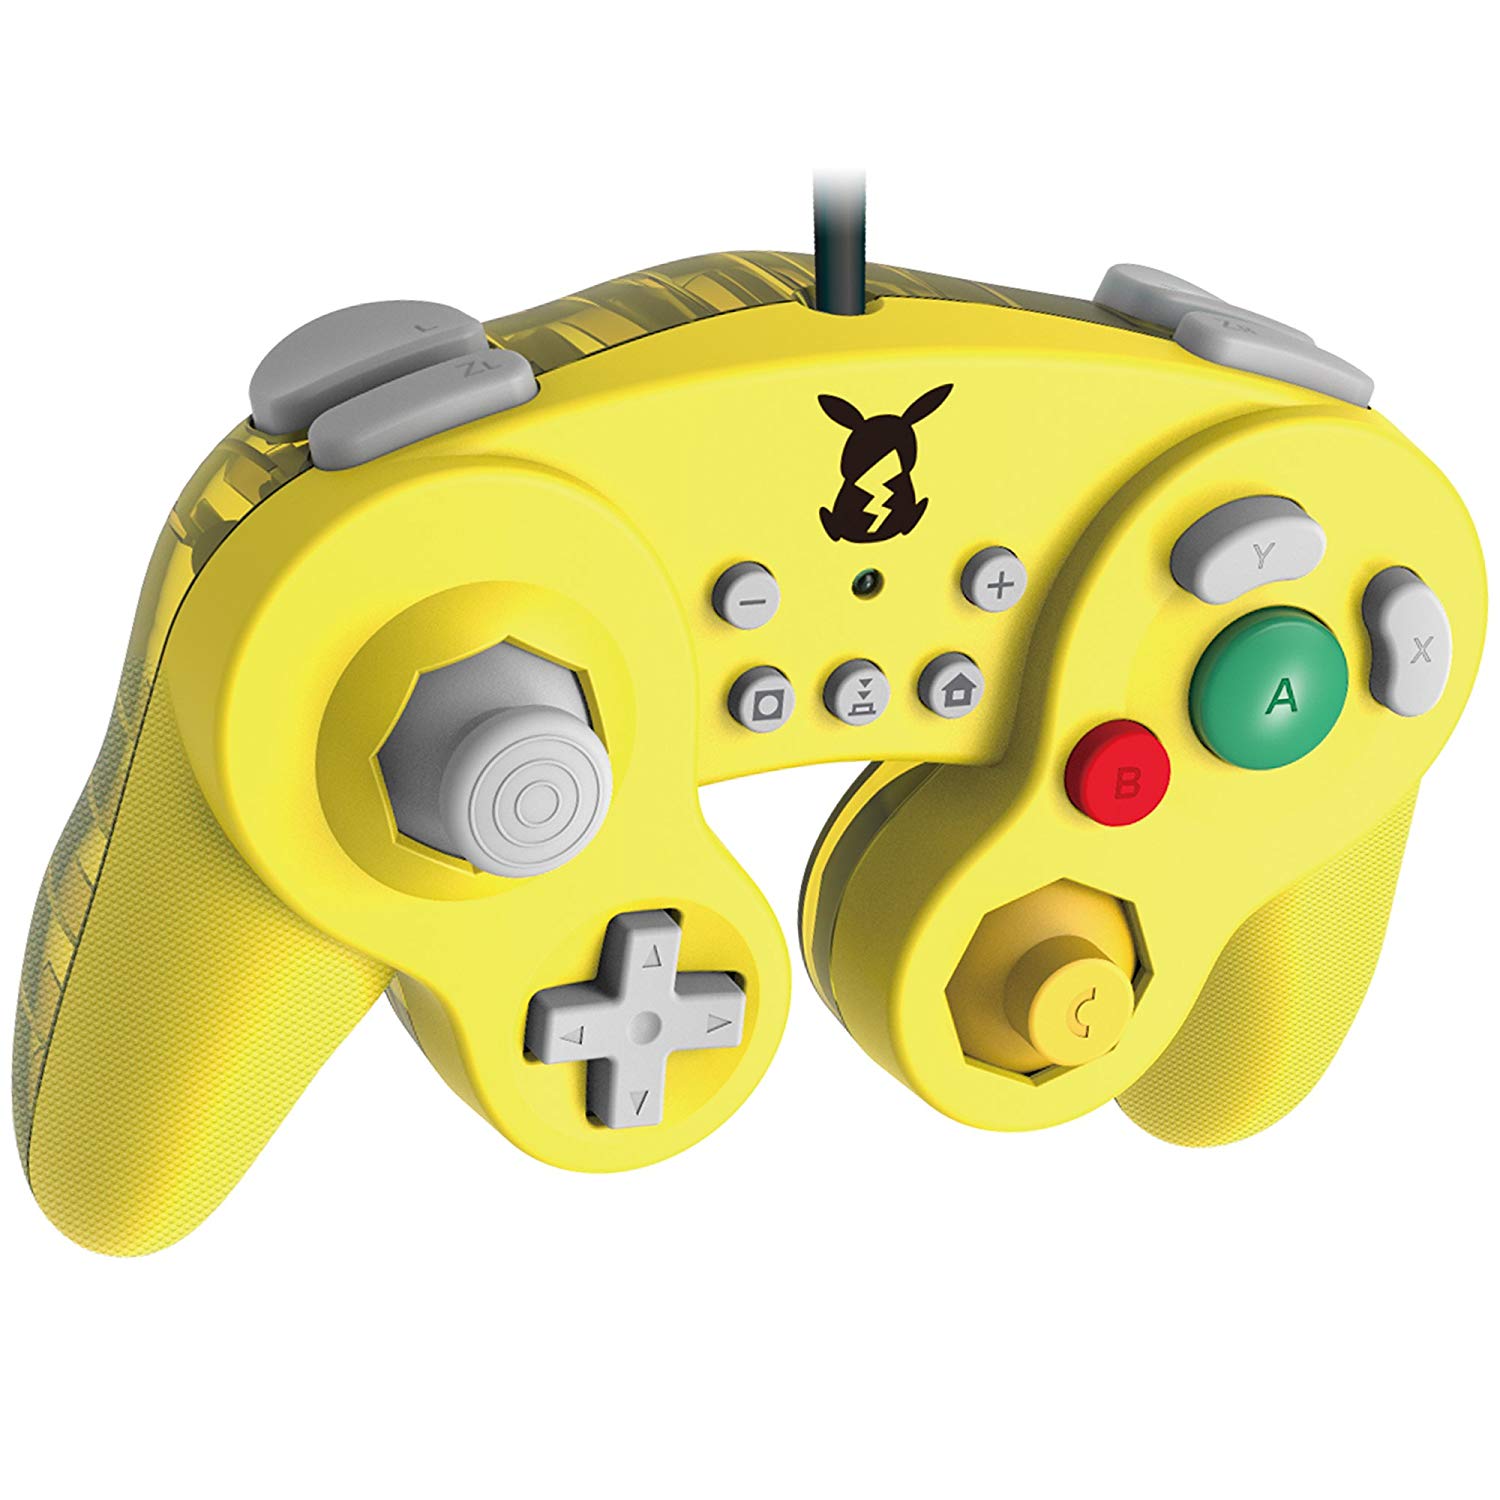 HORI Reveals Mario, Zelda, And Pikachu GameCube Controllers For Switch –  NintendoSoup